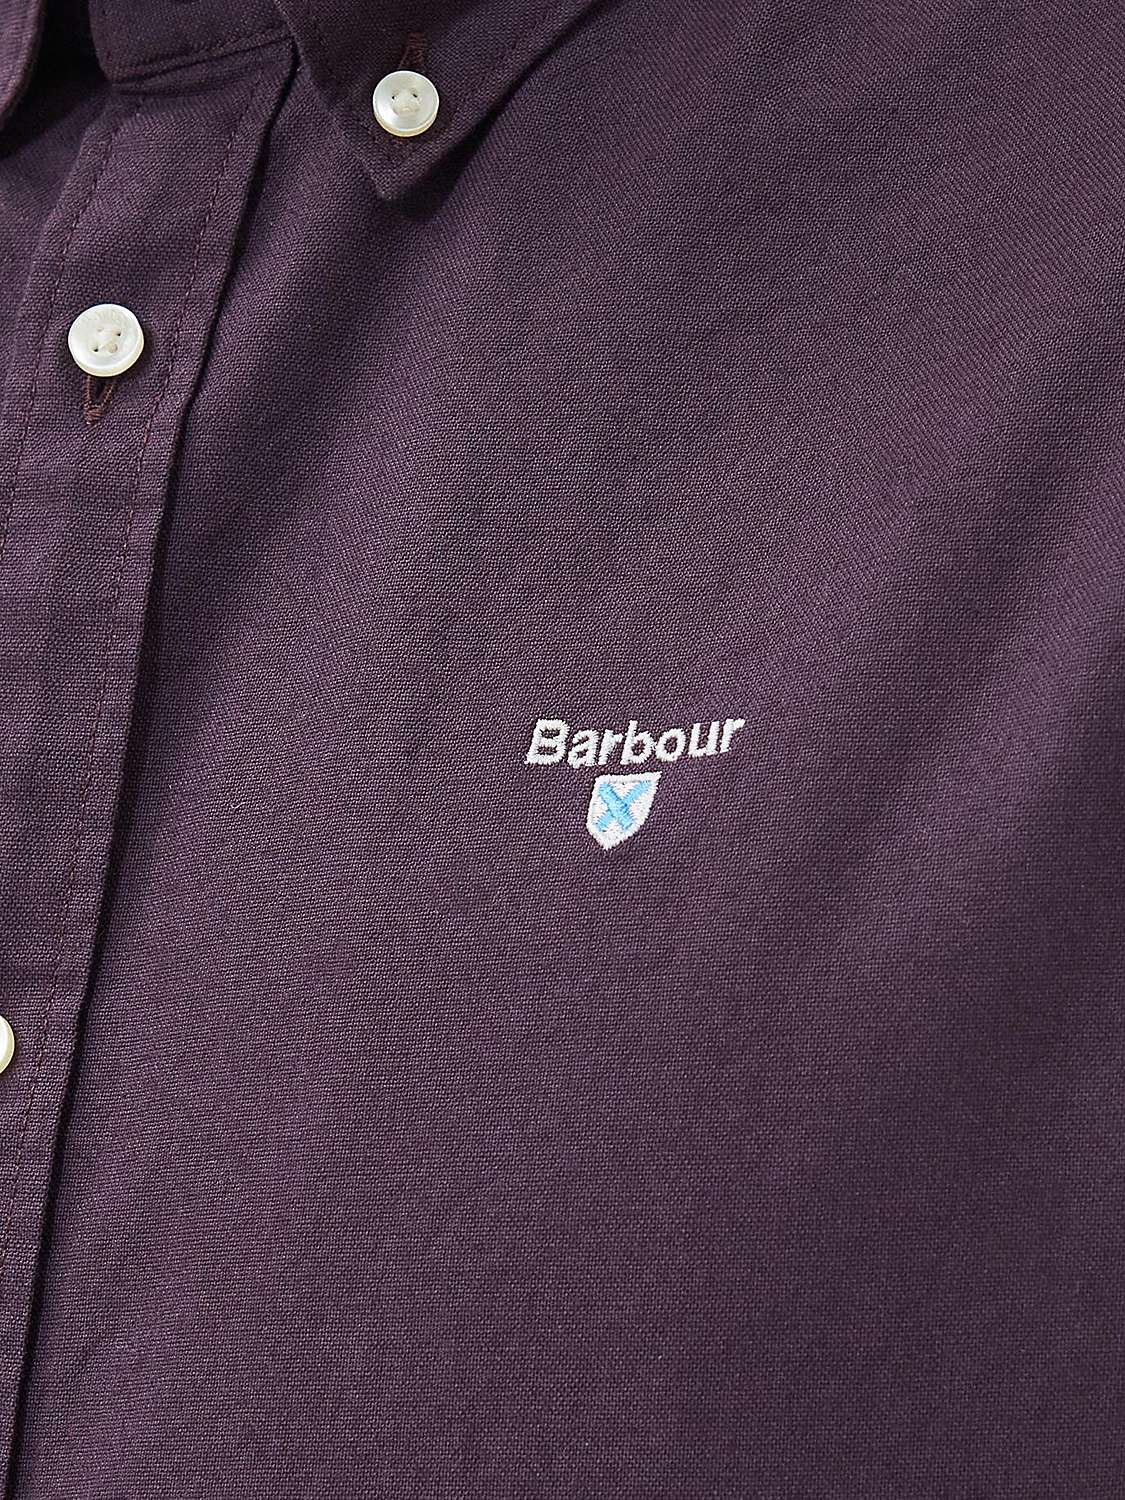 Buy Barbour Tailored Fit Oxford Shirt, Fig Online at johnlewis.com